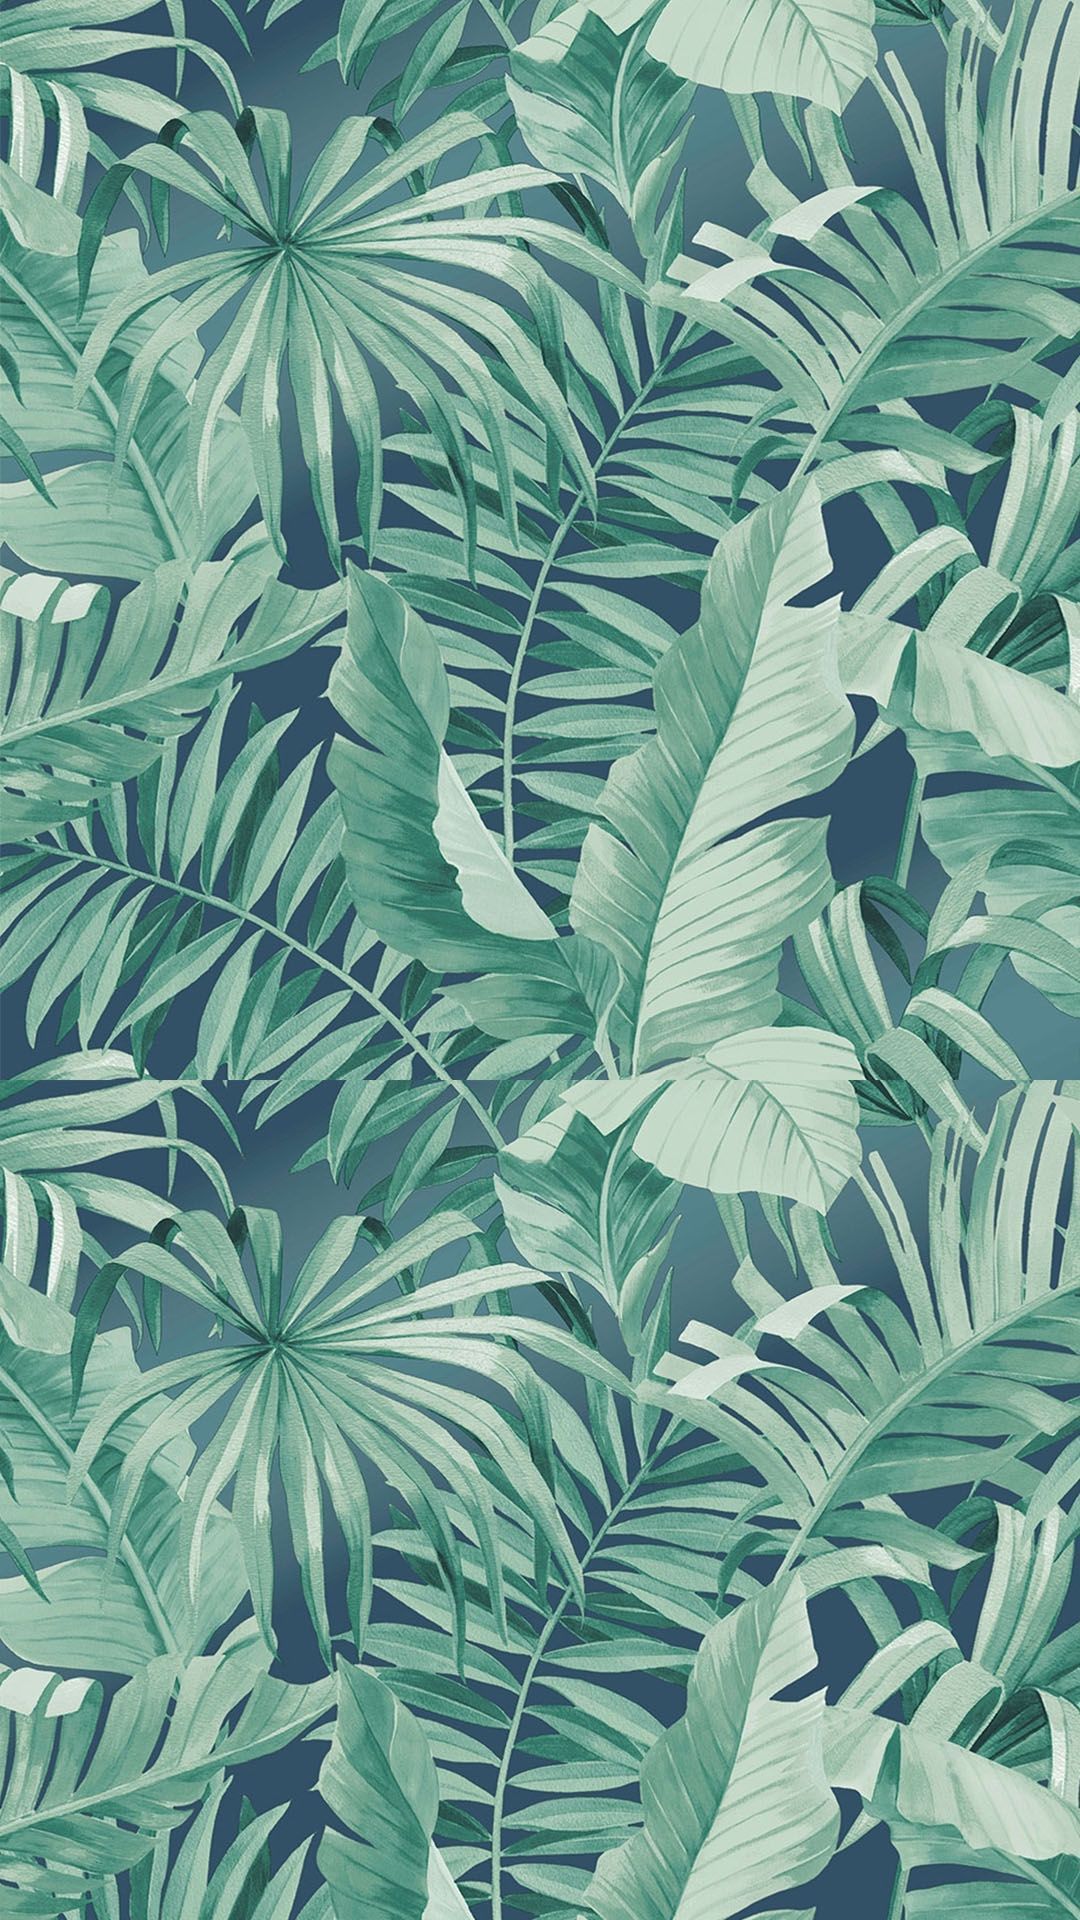 IPhone wallpaper tropical leaves with high-resolution 1080x1920 pixel. You can use this wallpaper for your iPhone 5, 6, 7, 8, X, XS, XR backgrounds, Mobile Screensaver, or iPad Lock Screen - Tropical